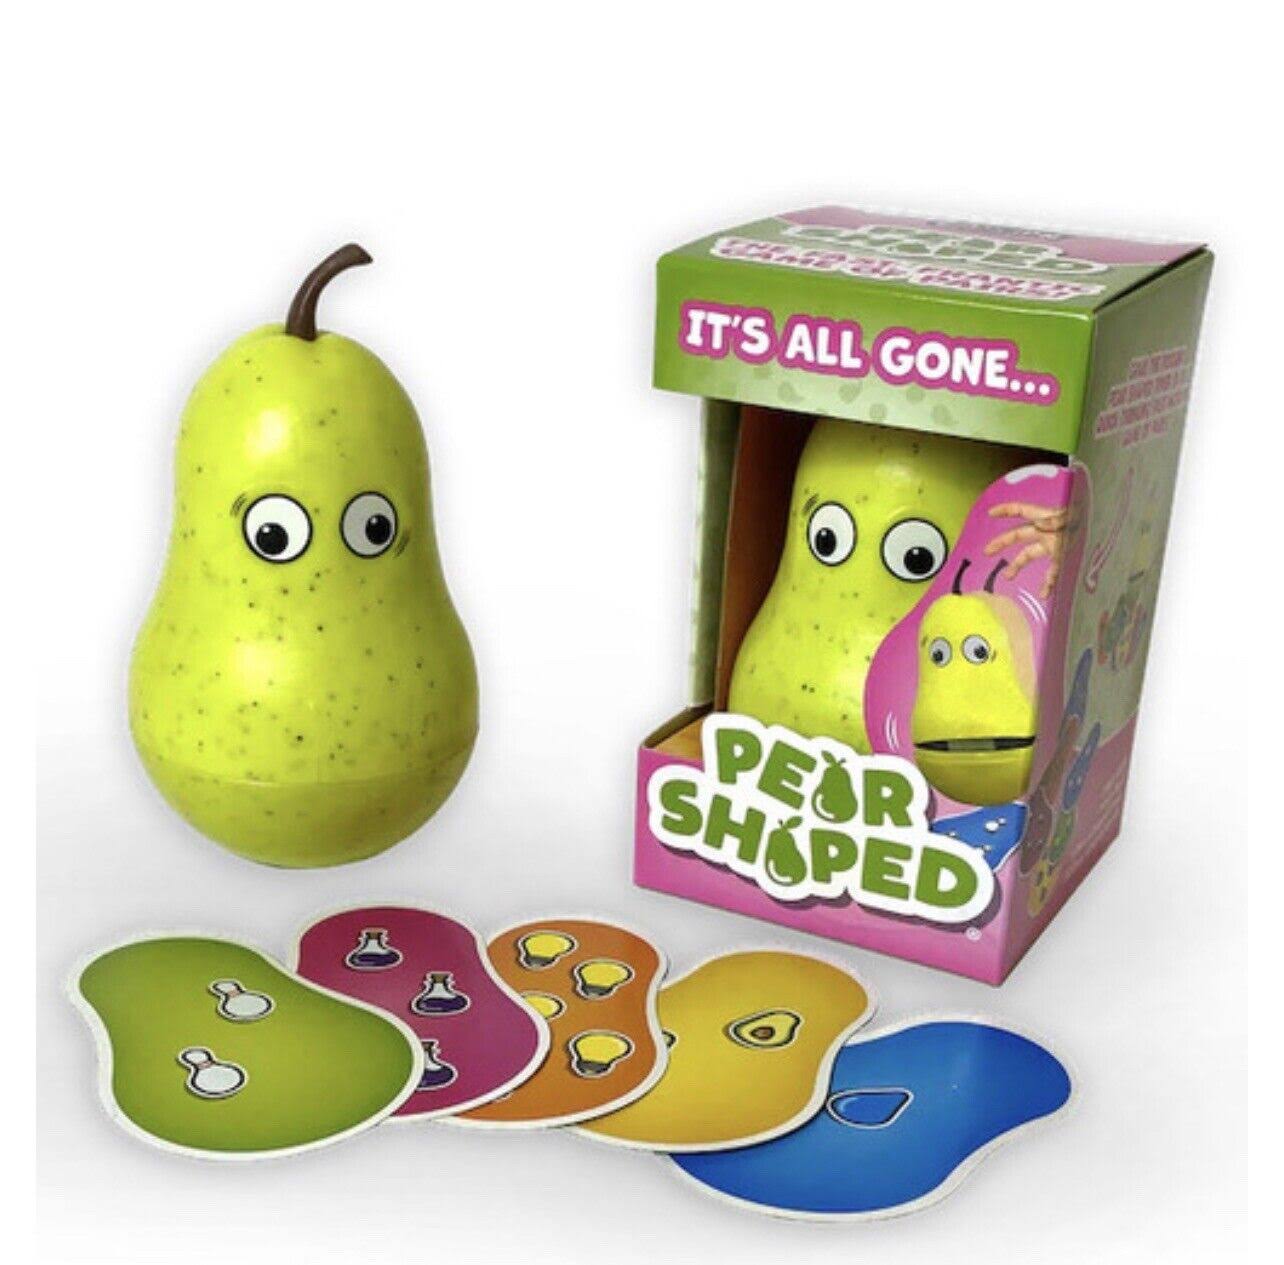 Blue Orange Games Pear Shaped Card Game - Family or Adult Speed Matching Party Game For 1 to 8 Players. Recommended For Ages 7 & Up.